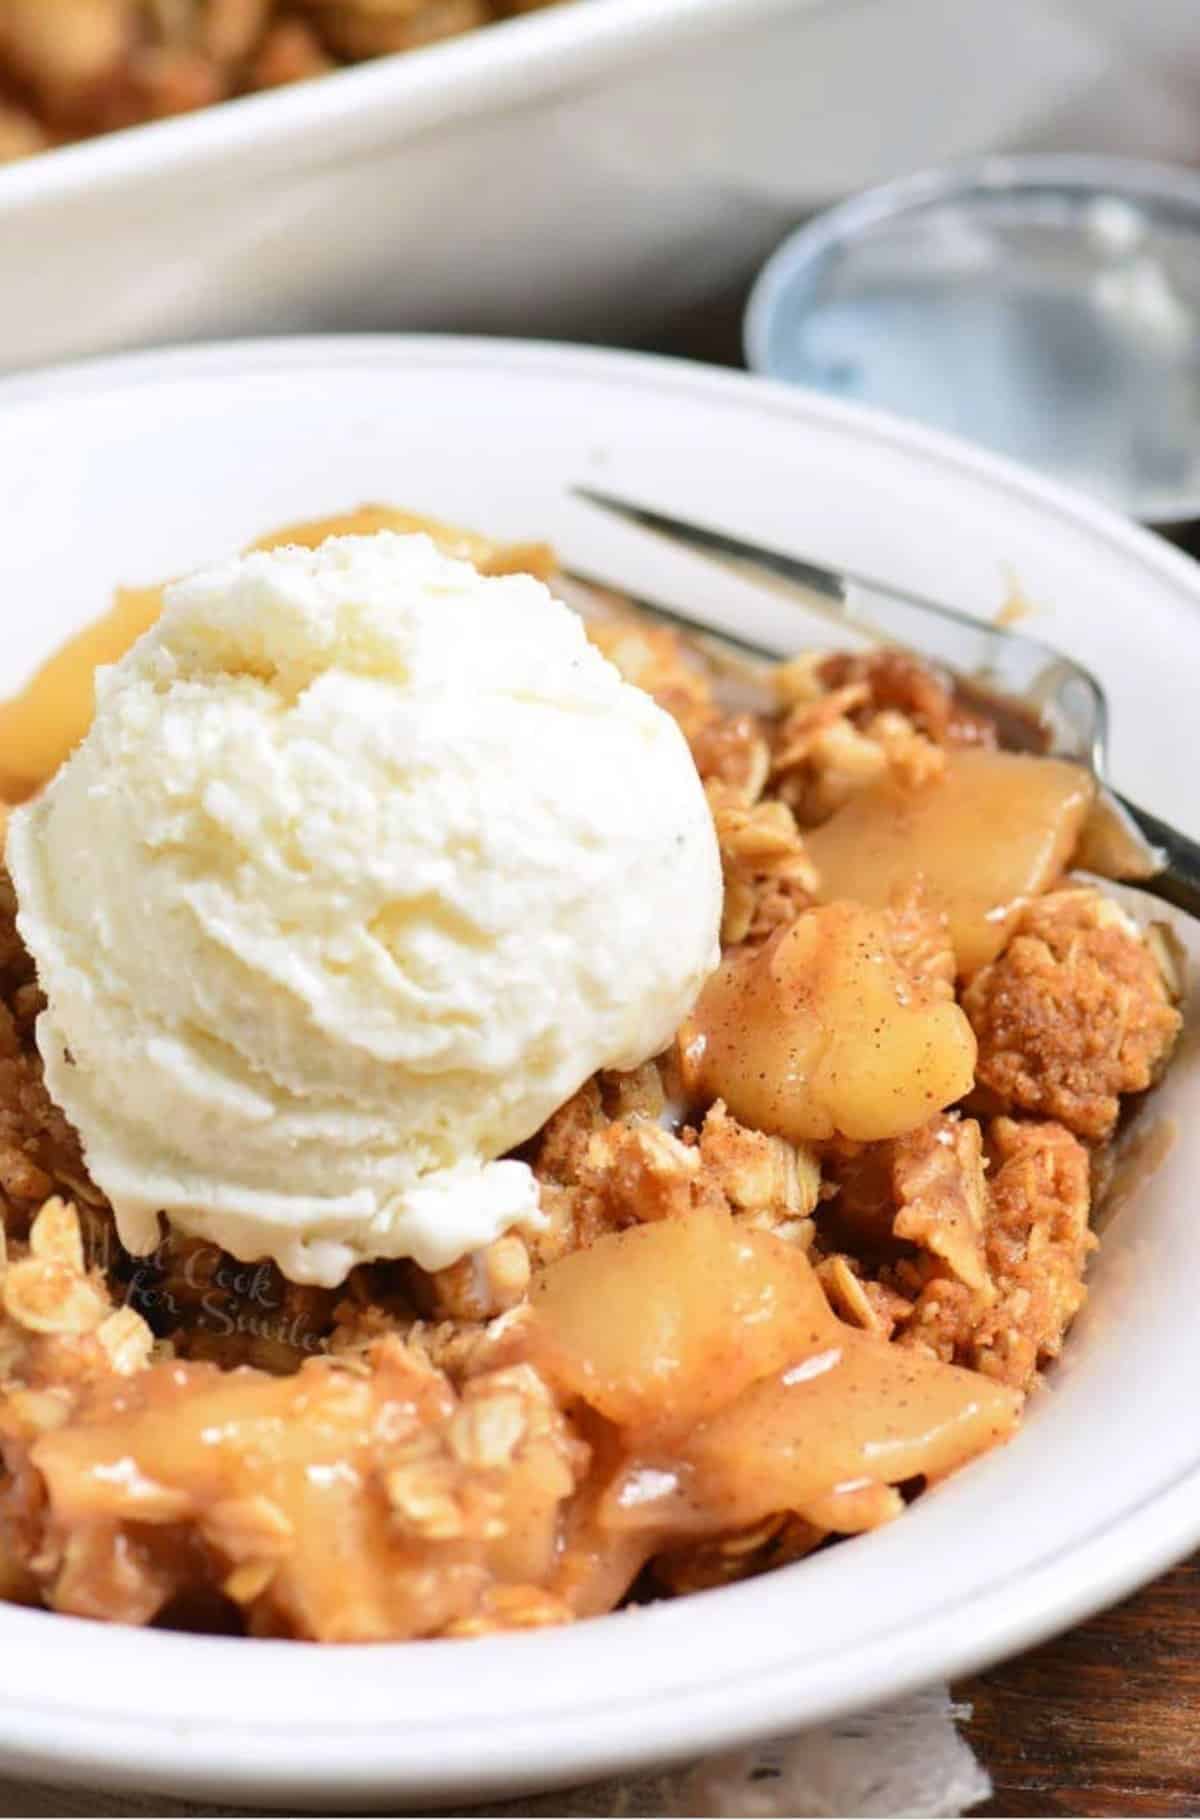 Apple Crisp in a bowl with ice cream on top.